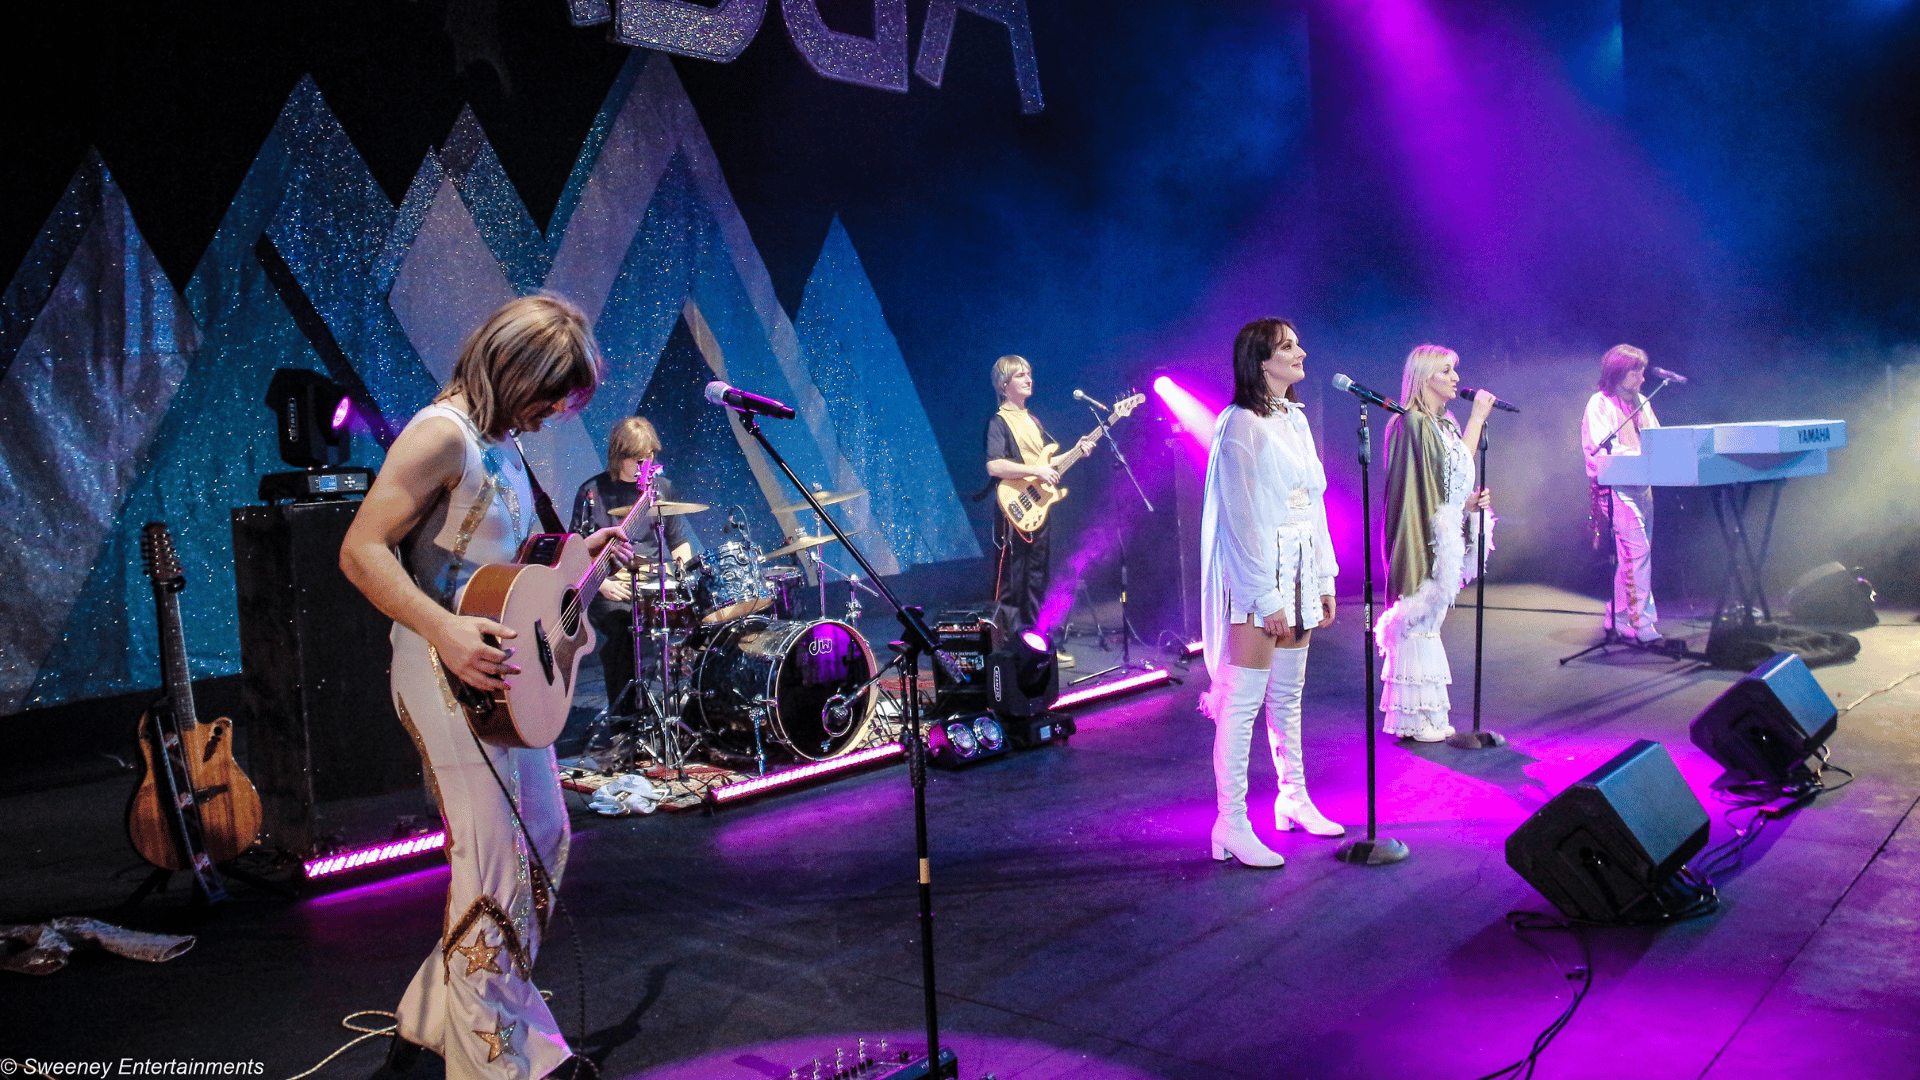 ABBA tribute band on stage singing